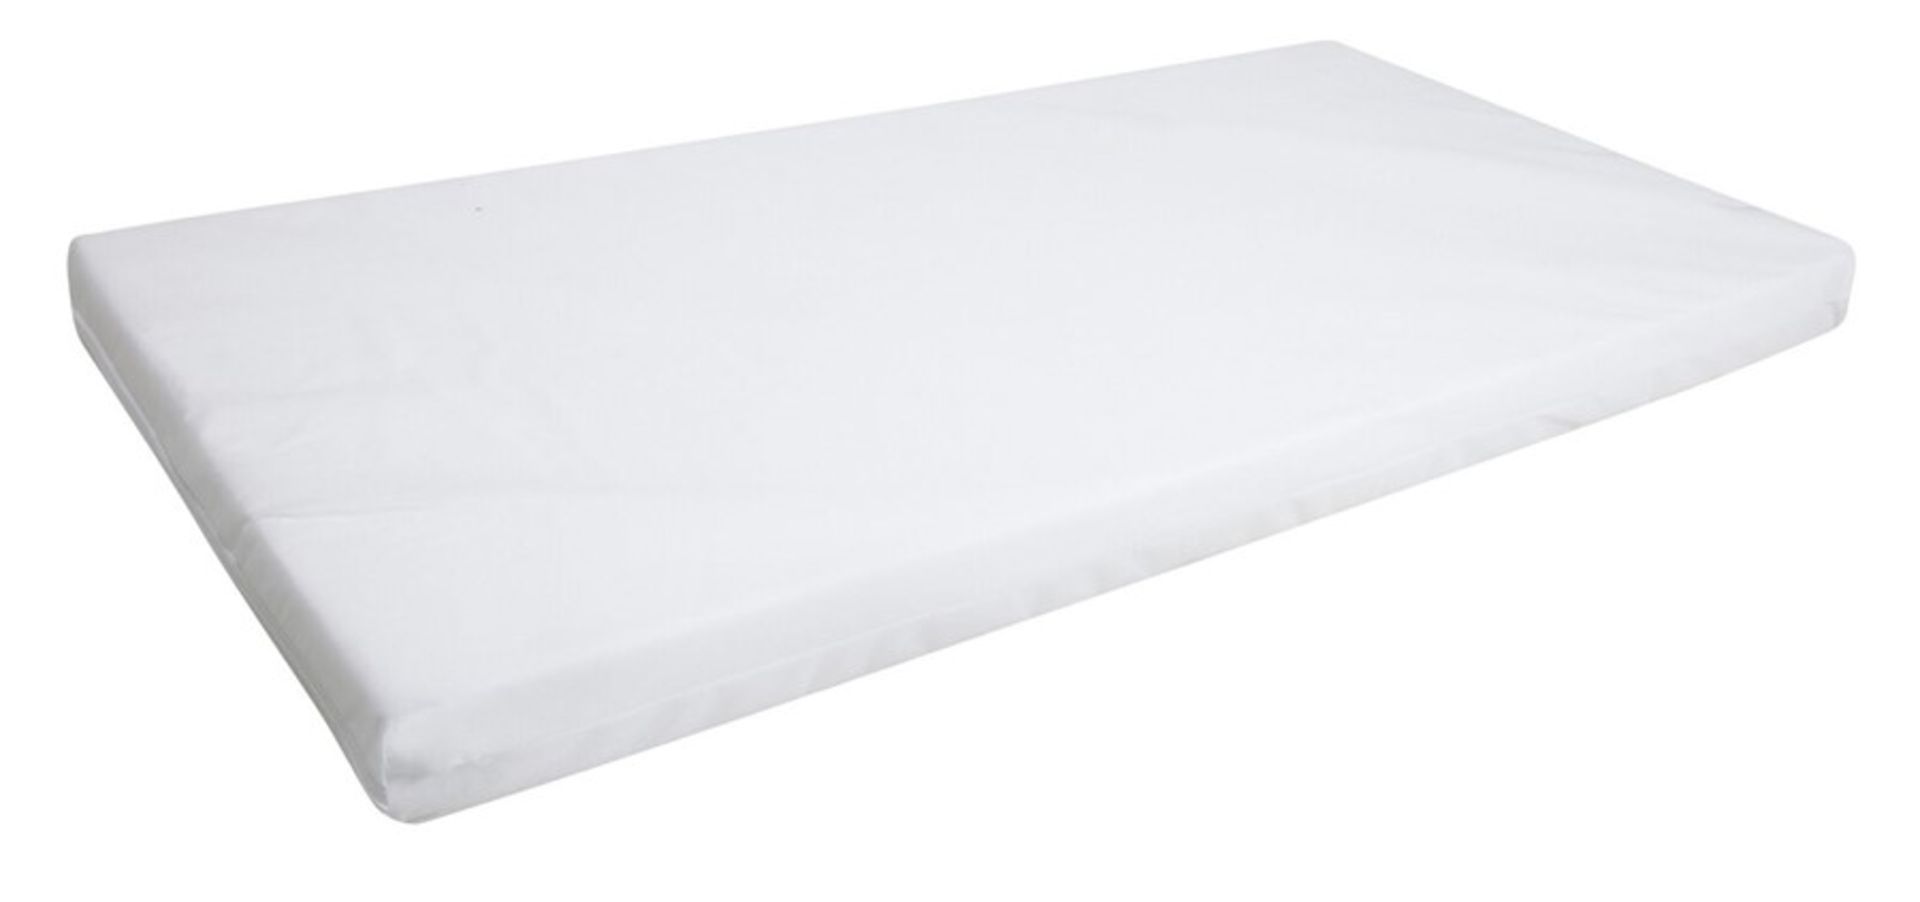 1 GRADE A BAGGED POPPYS PLAYGROUND COT MATTRESS - 140 X 70CM / RRP £34.95 (VIEWING HIGHLY